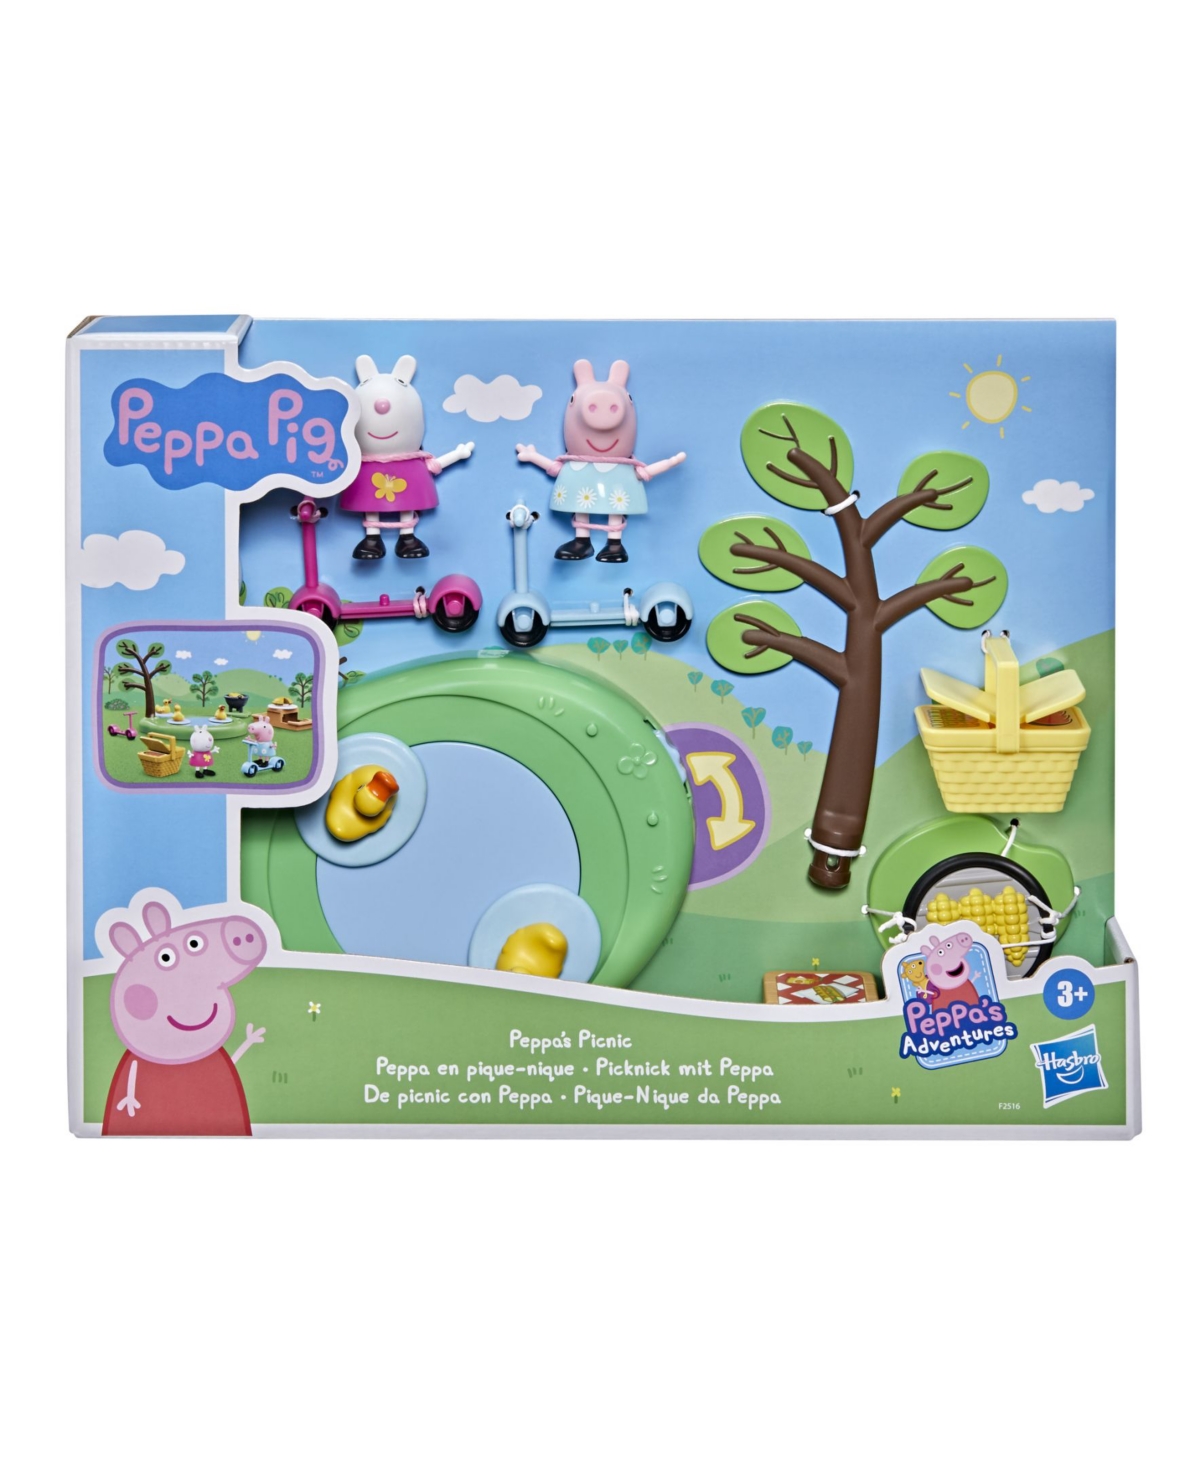 10-Piece Peppa Pig Peppa's Adventures Picnic Playset Toy $9.15 at Macy's w/ Free Store Pickup or Free S&H on $25+